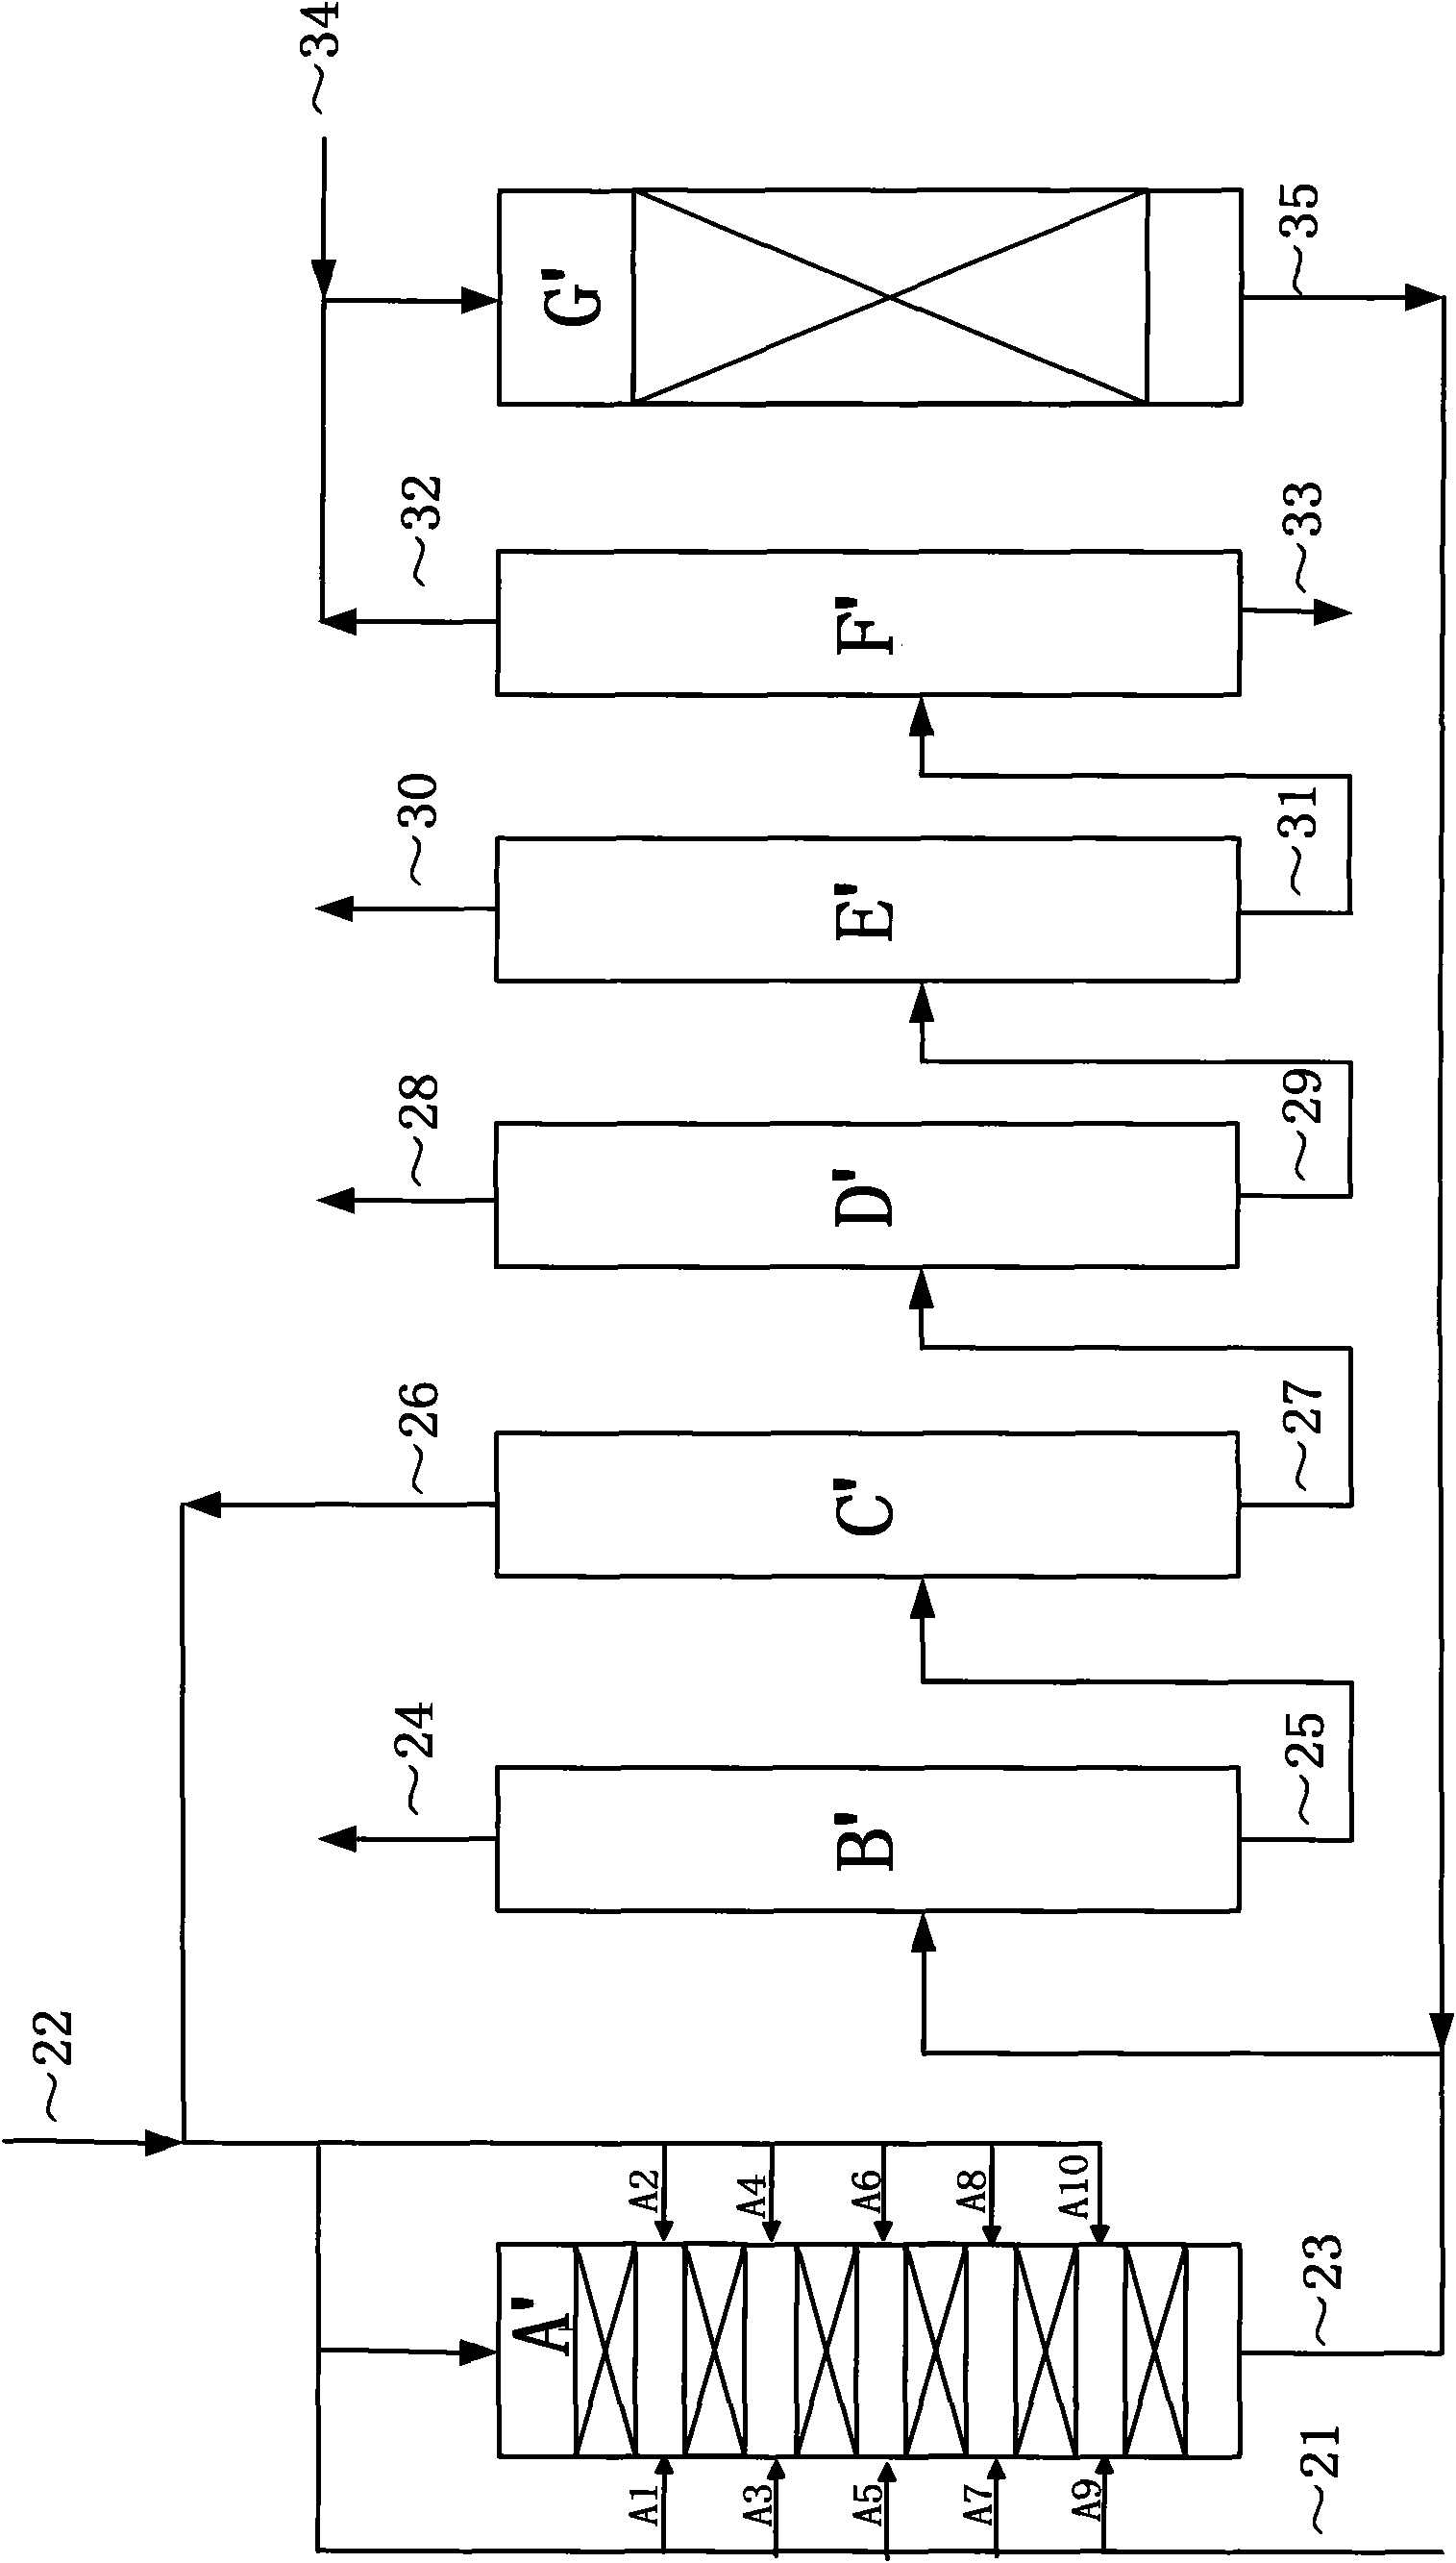 Method for producing ethylbenzene by reacting pure ethylene or dry gas with benzene